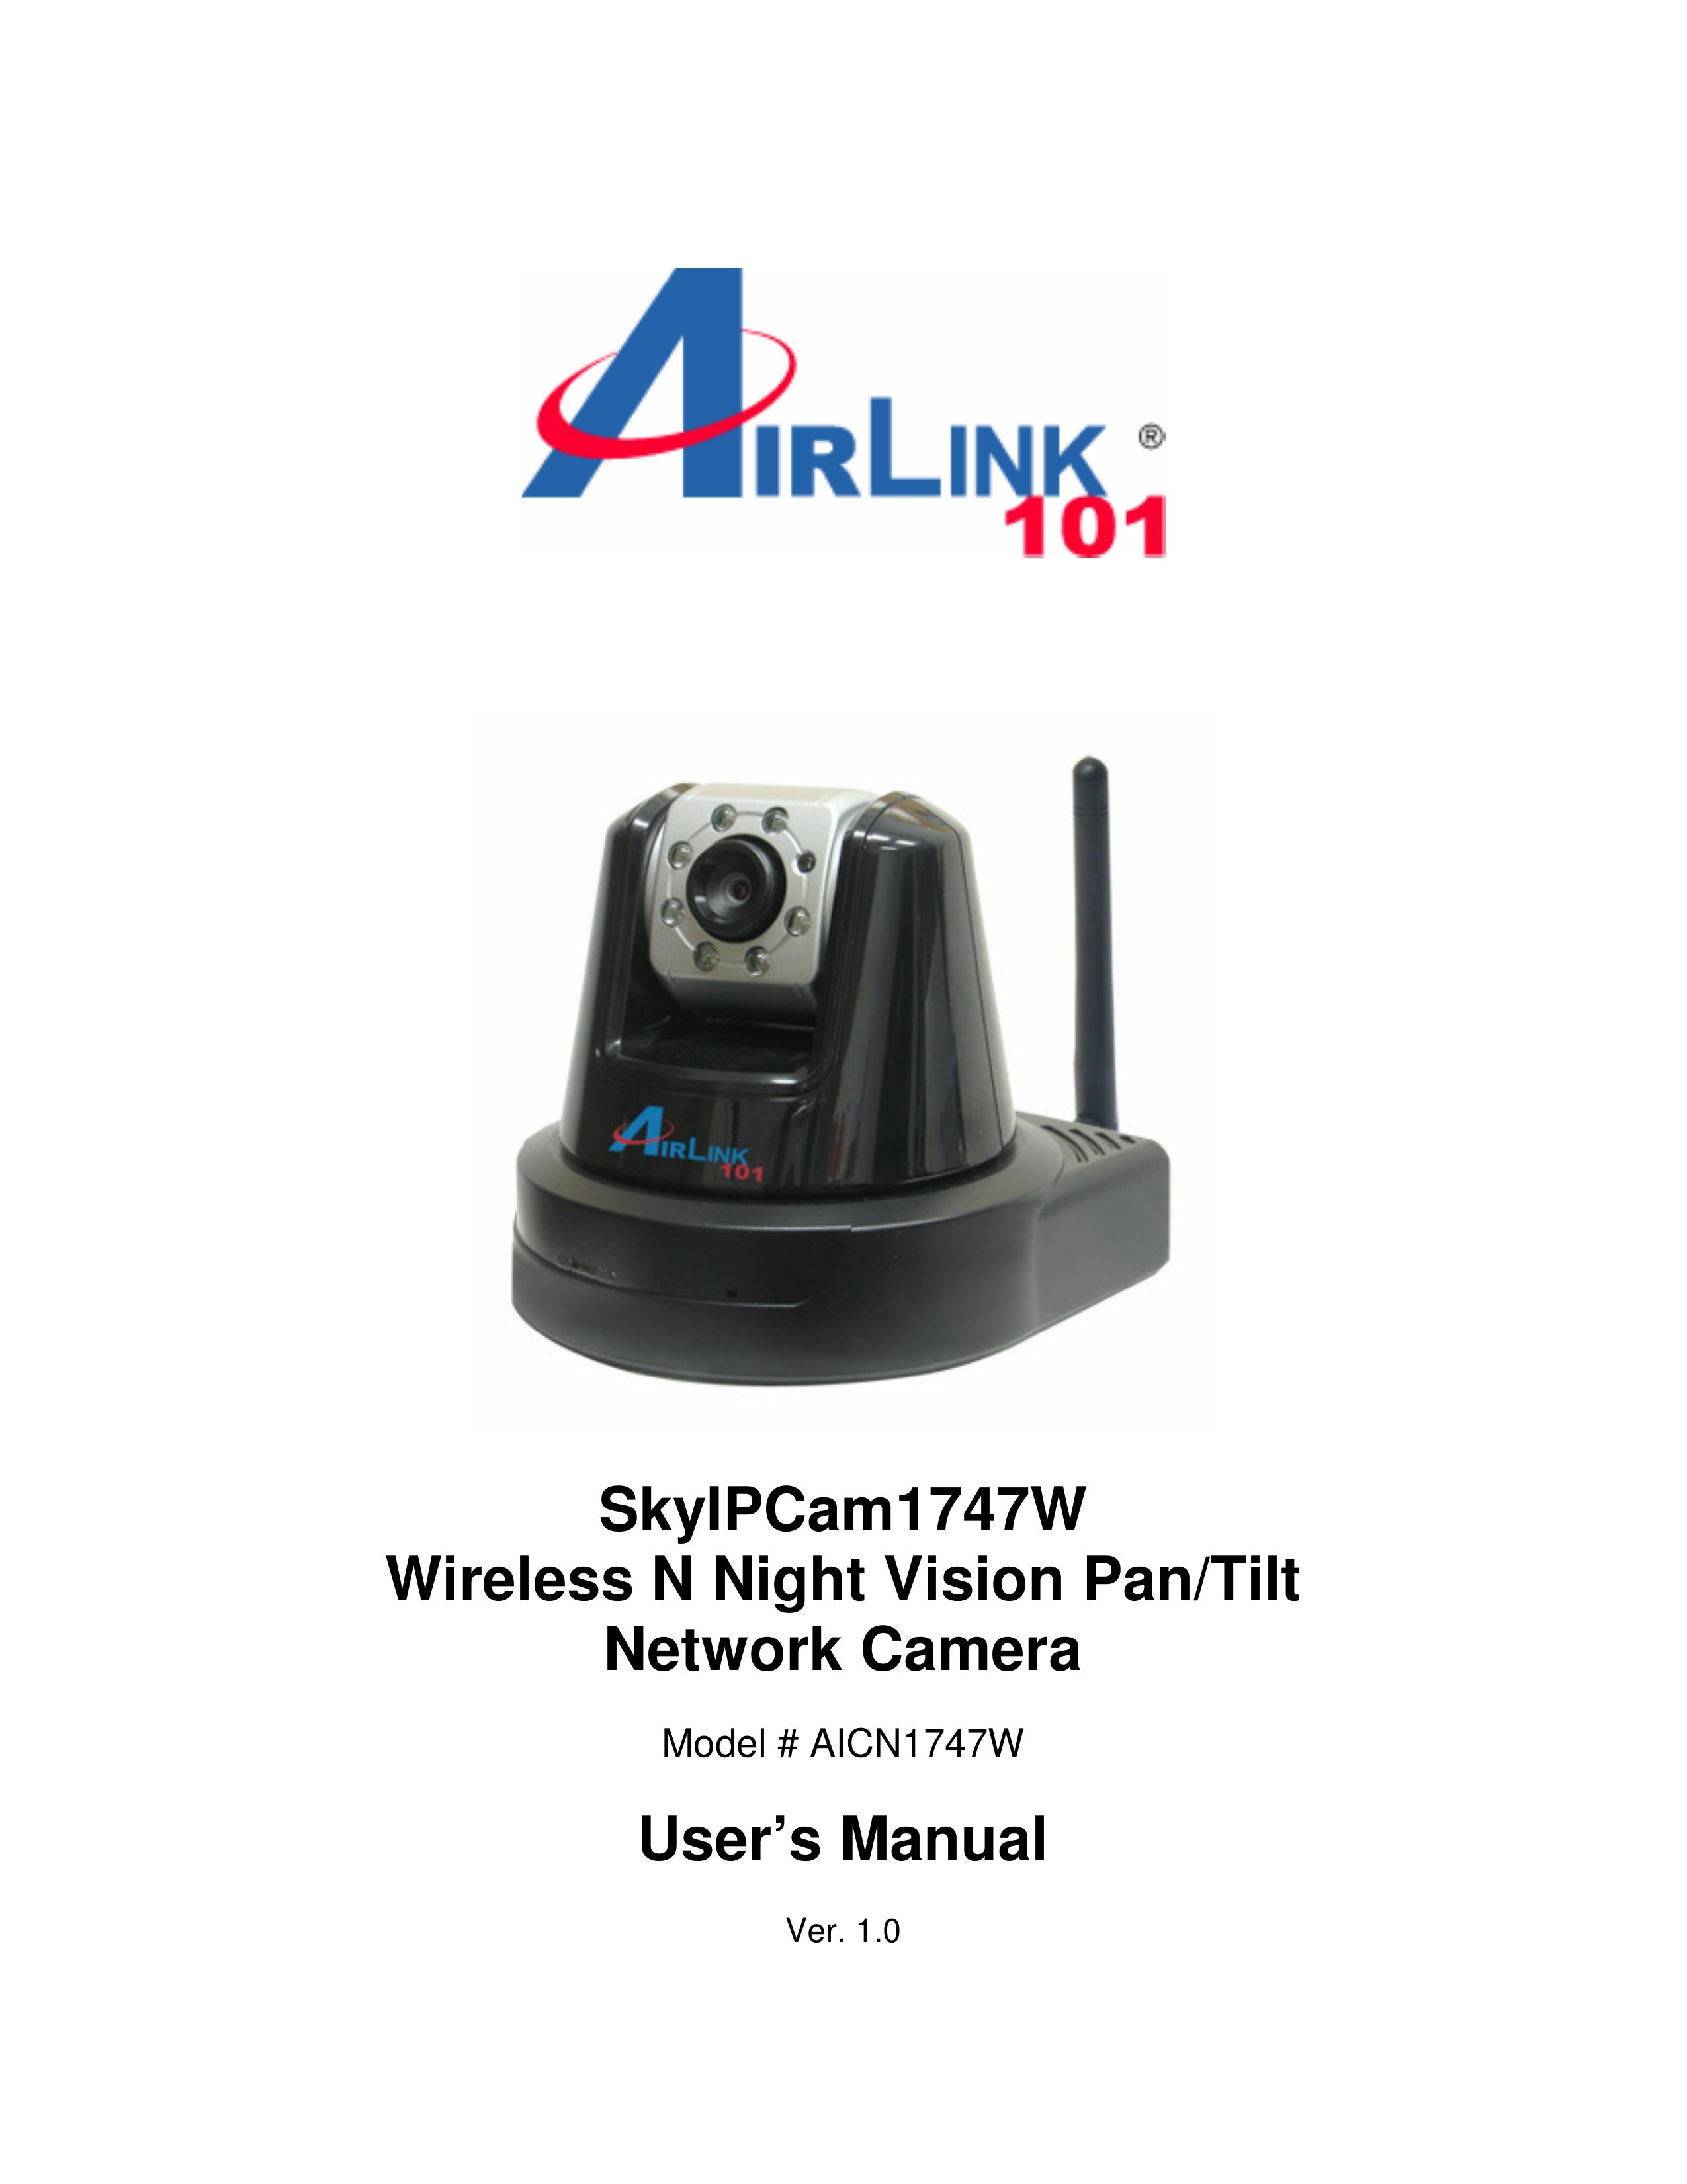 Airlink101 AICN1747W Security Camera User Manual